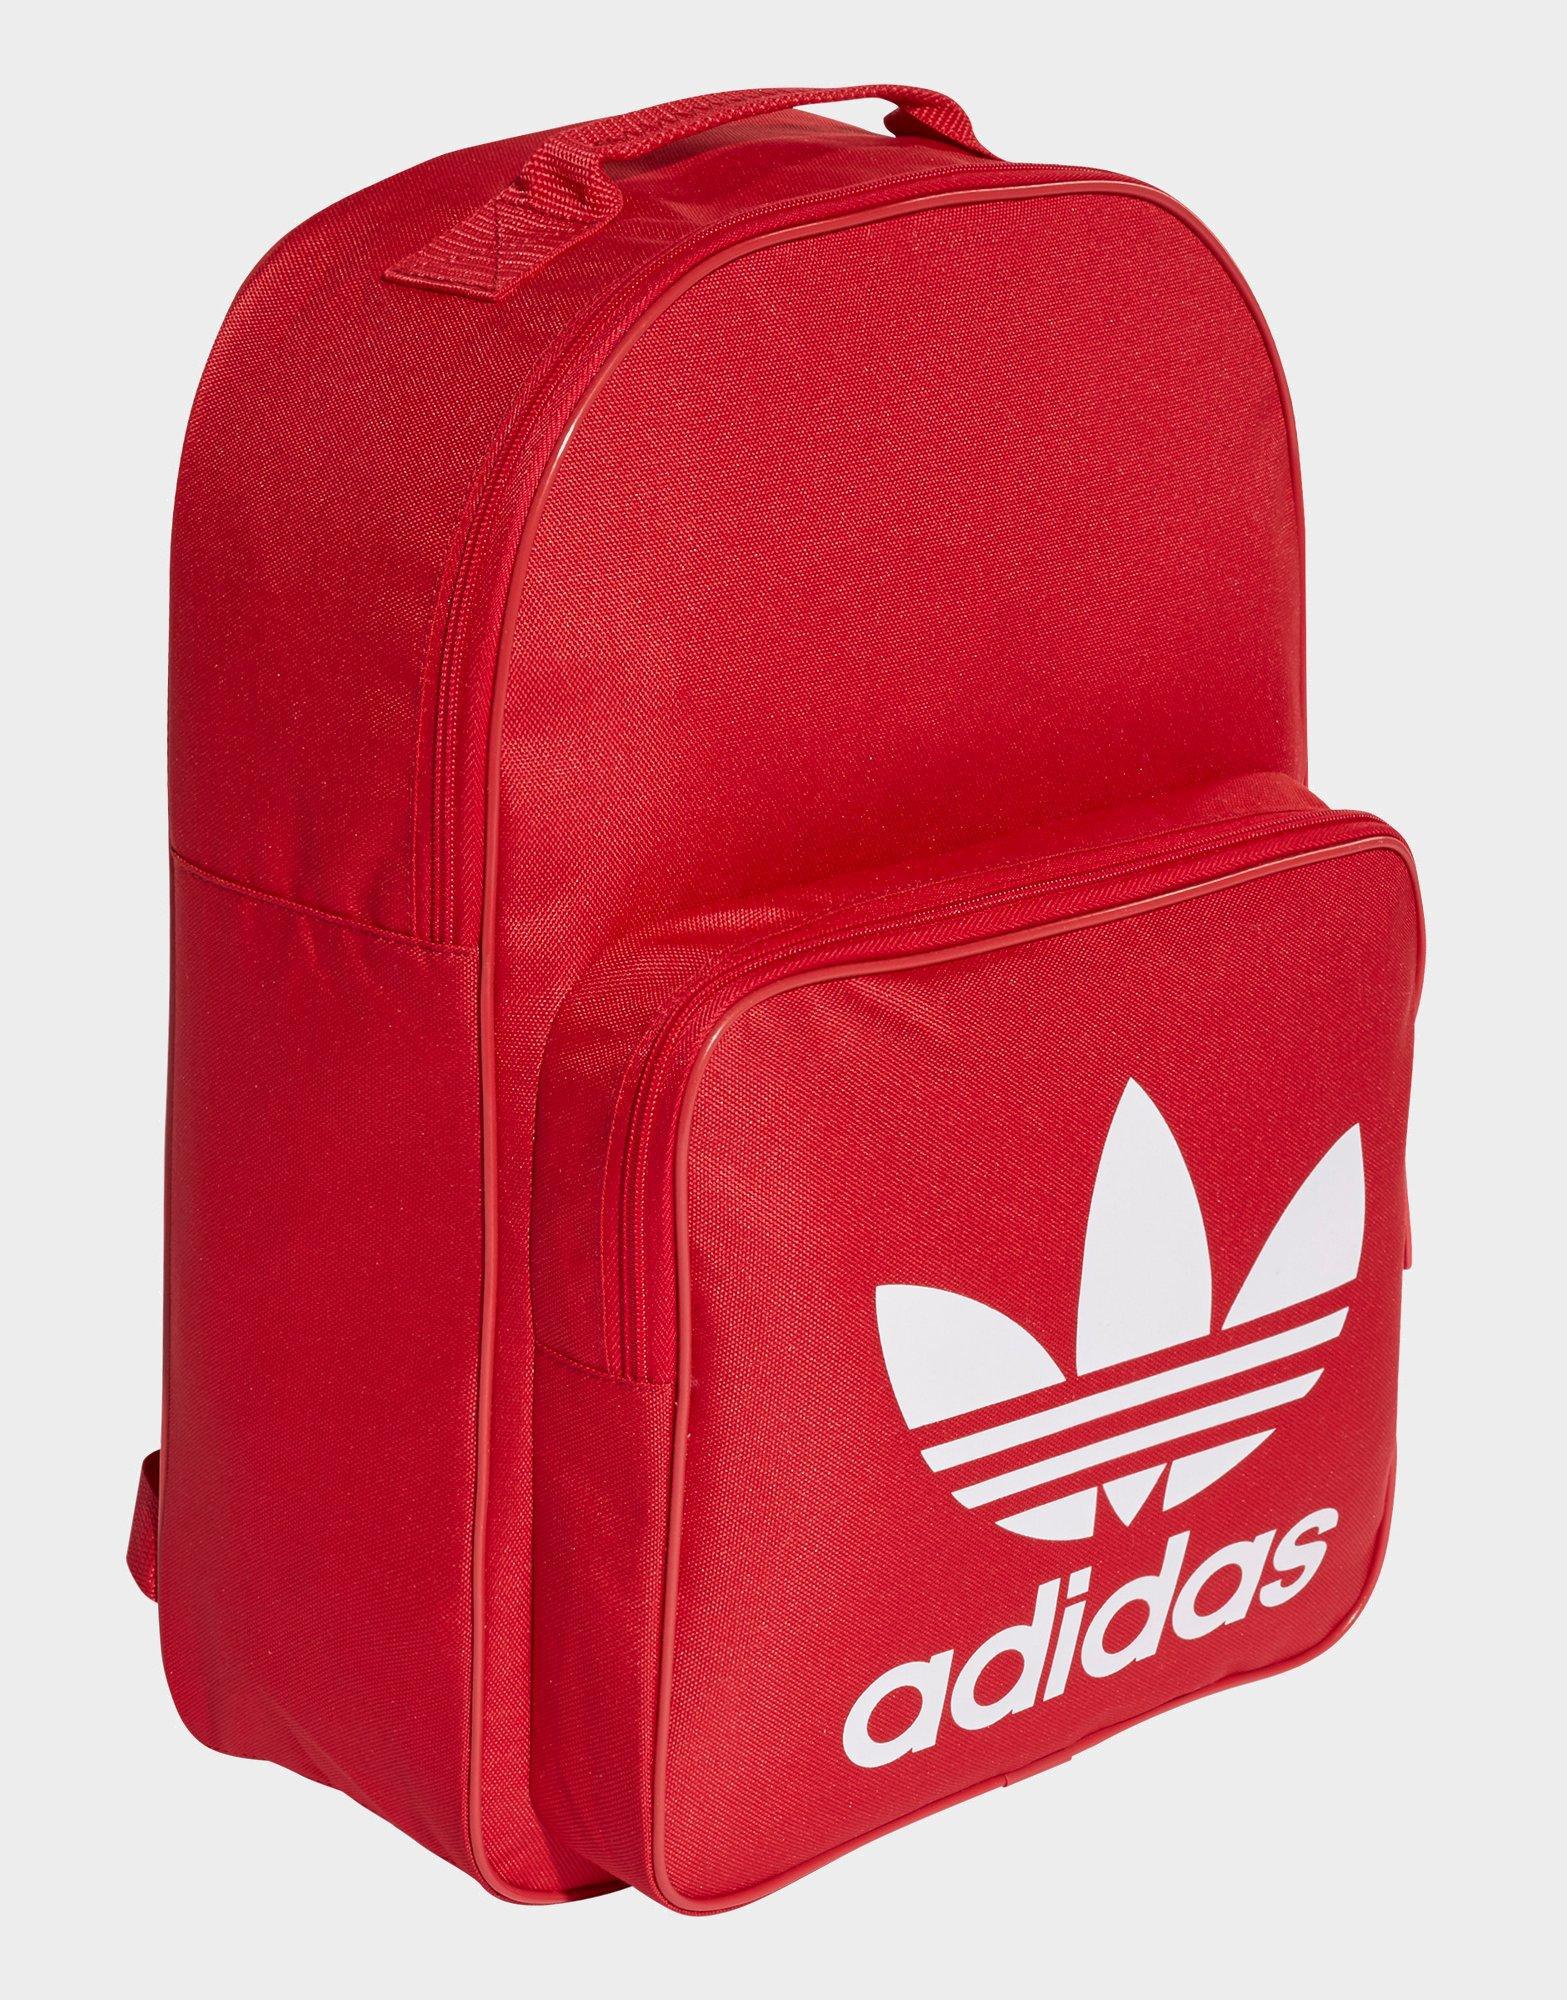 adidas Trefoil Backpack in Real Red 